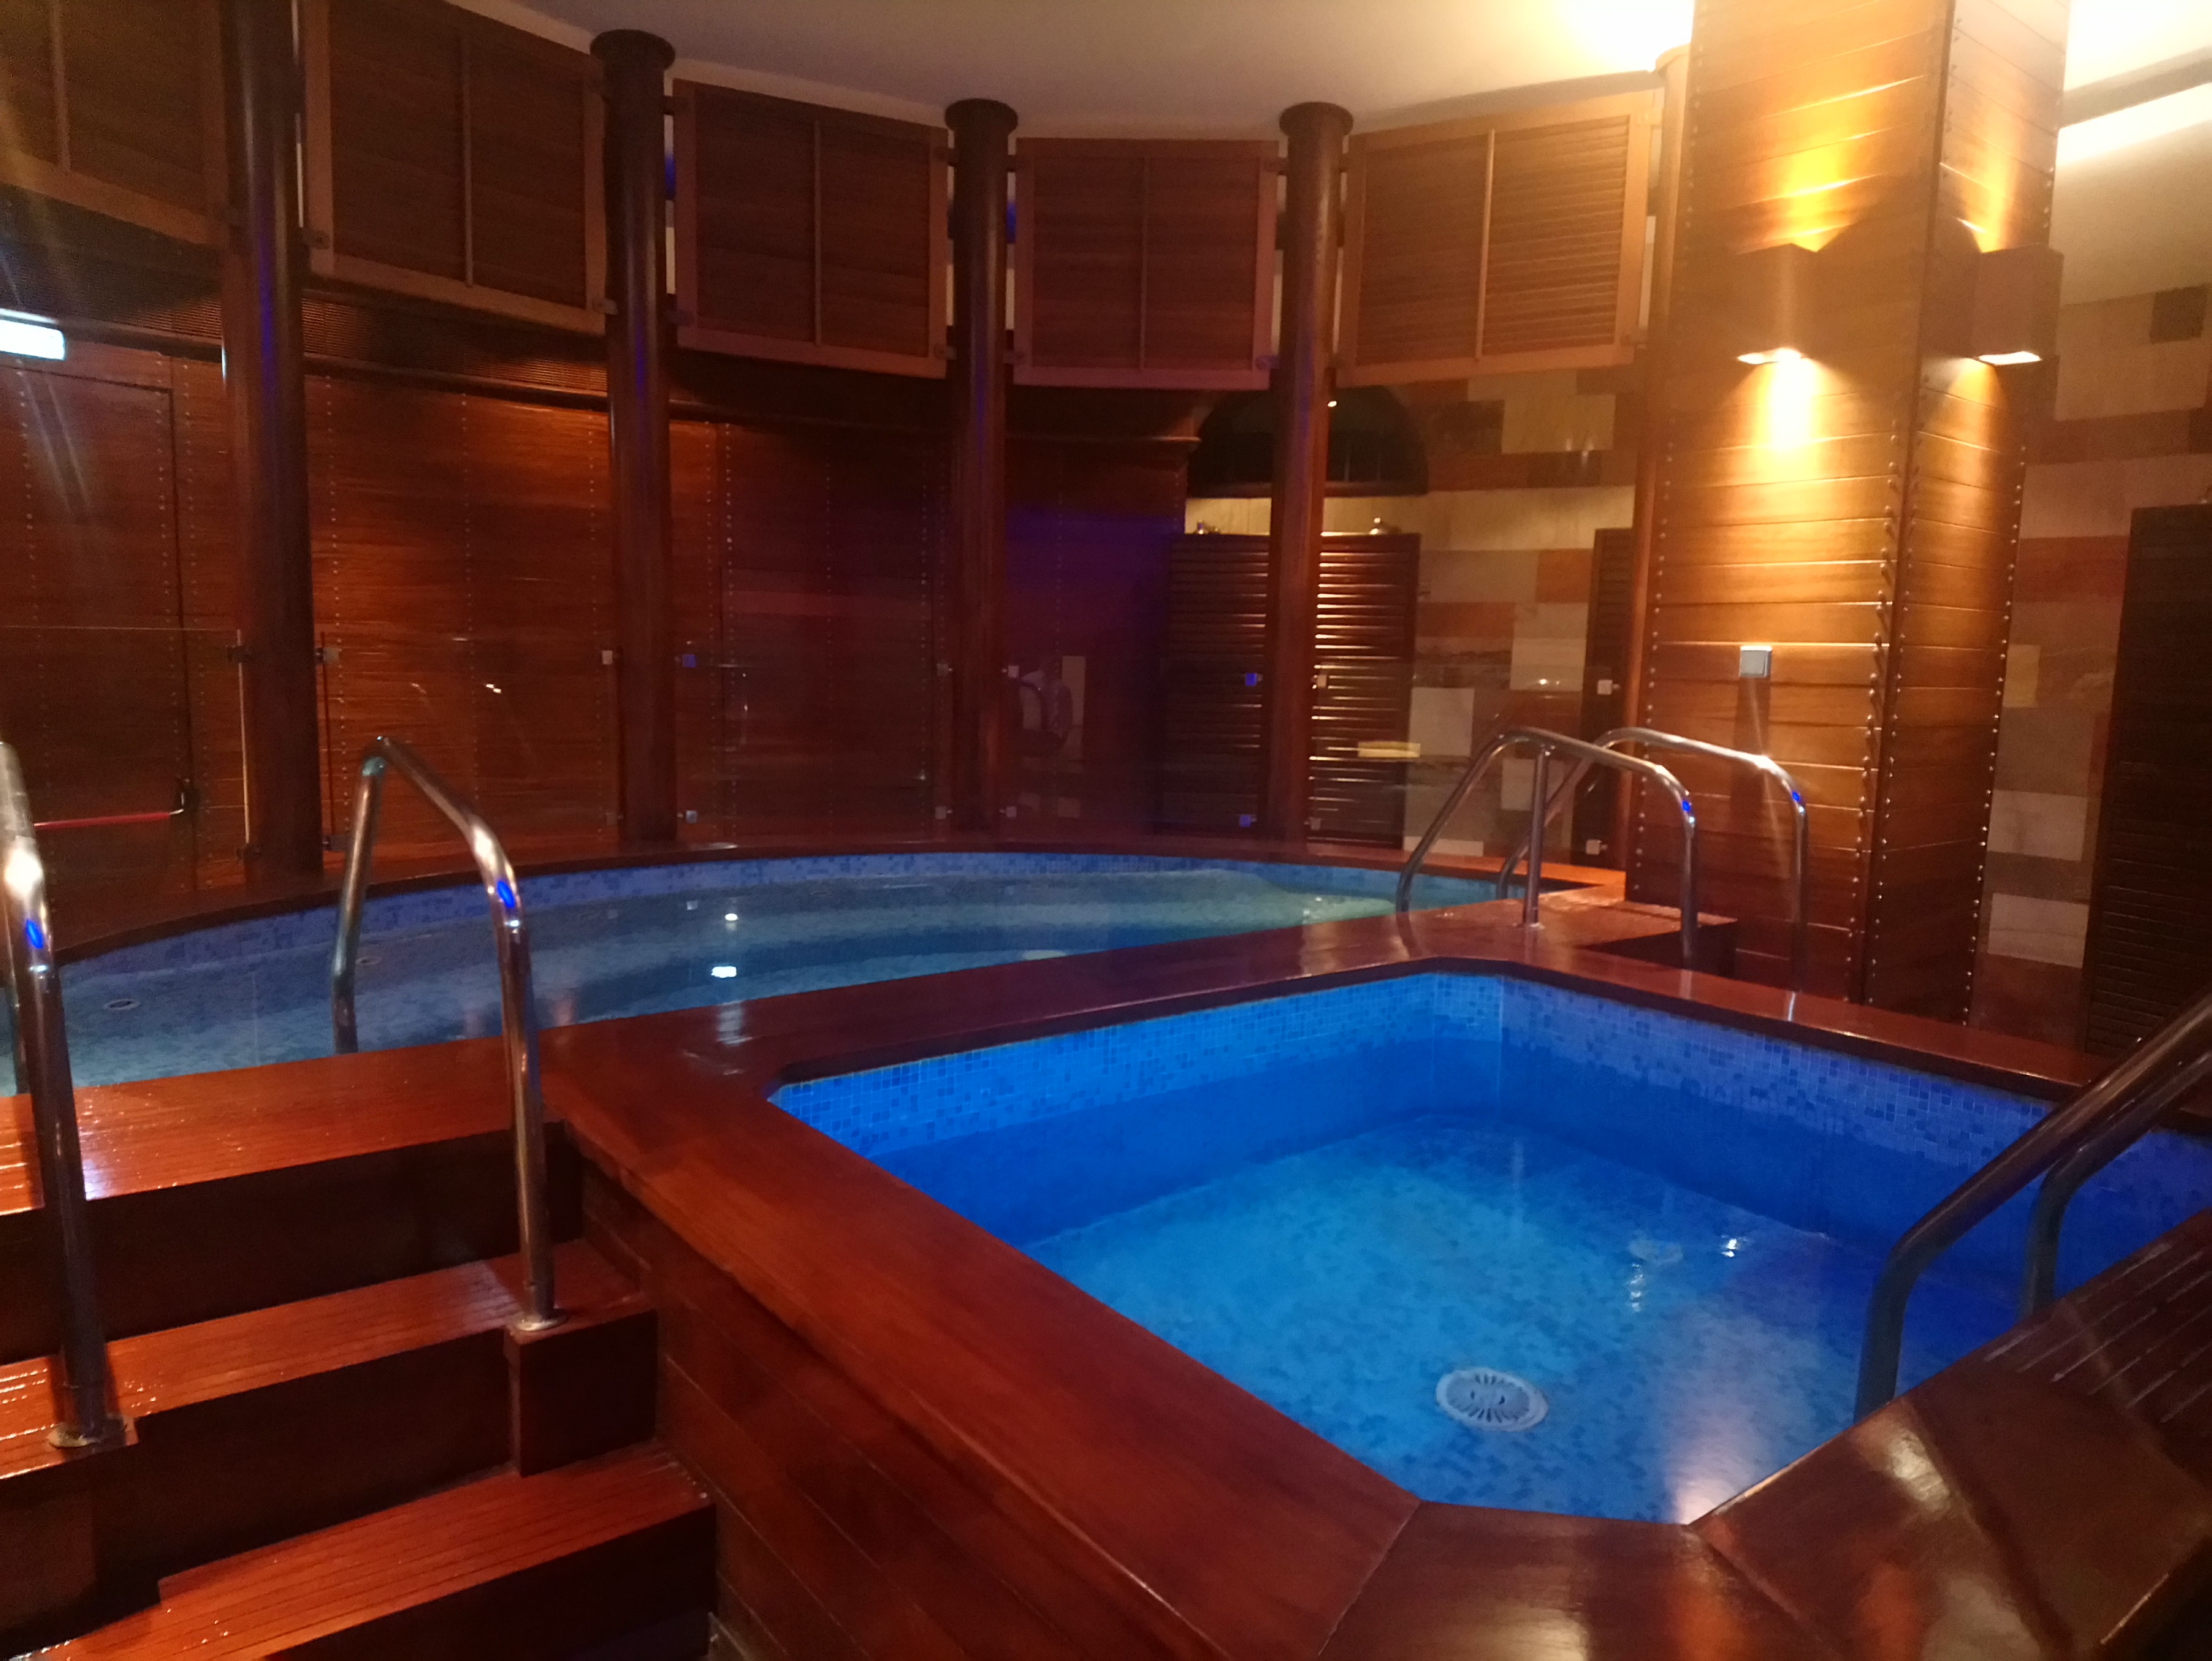 Jacuzzi and Plunge Pool at Columbia Beach Resort, Cyprus